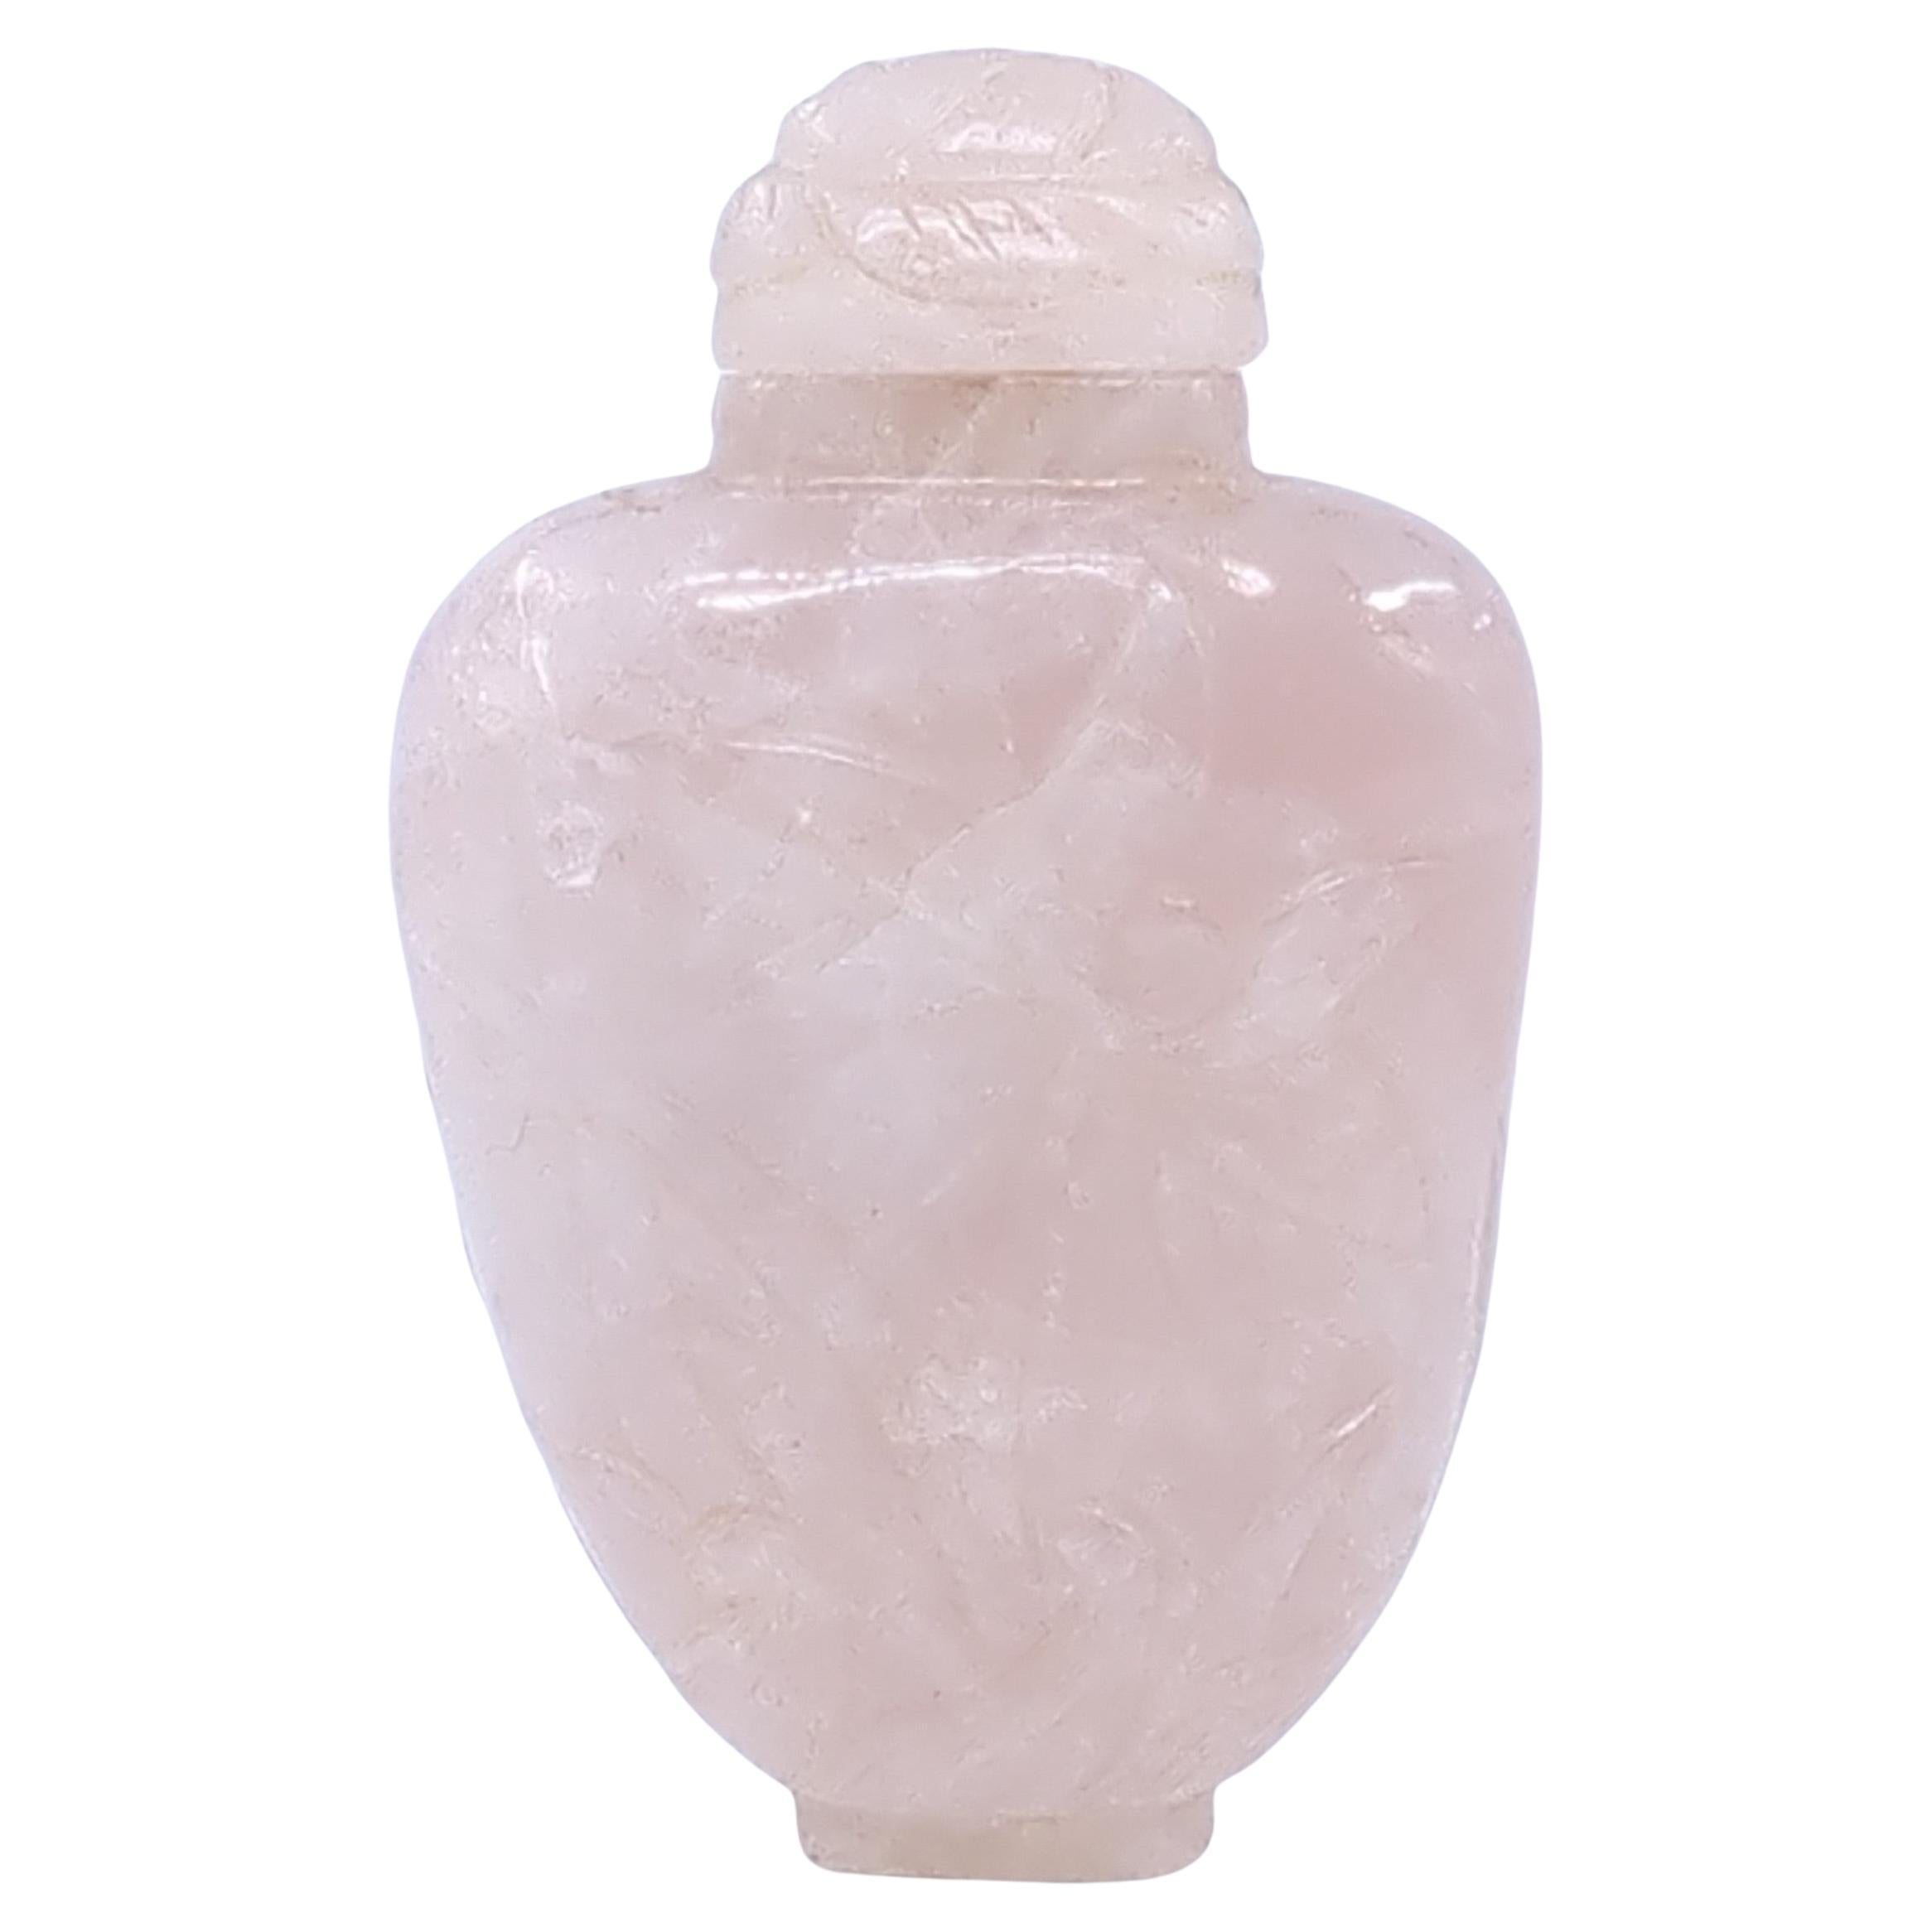 This mid 20c, 5/6/7 period carved rose quartz snuff bottle is a delicate and exquisite artifact, reflecting the refined aesthetic and skilled craftsmanship of the period. The bottle is carved from a single piece of rose quartz, known for its gentle